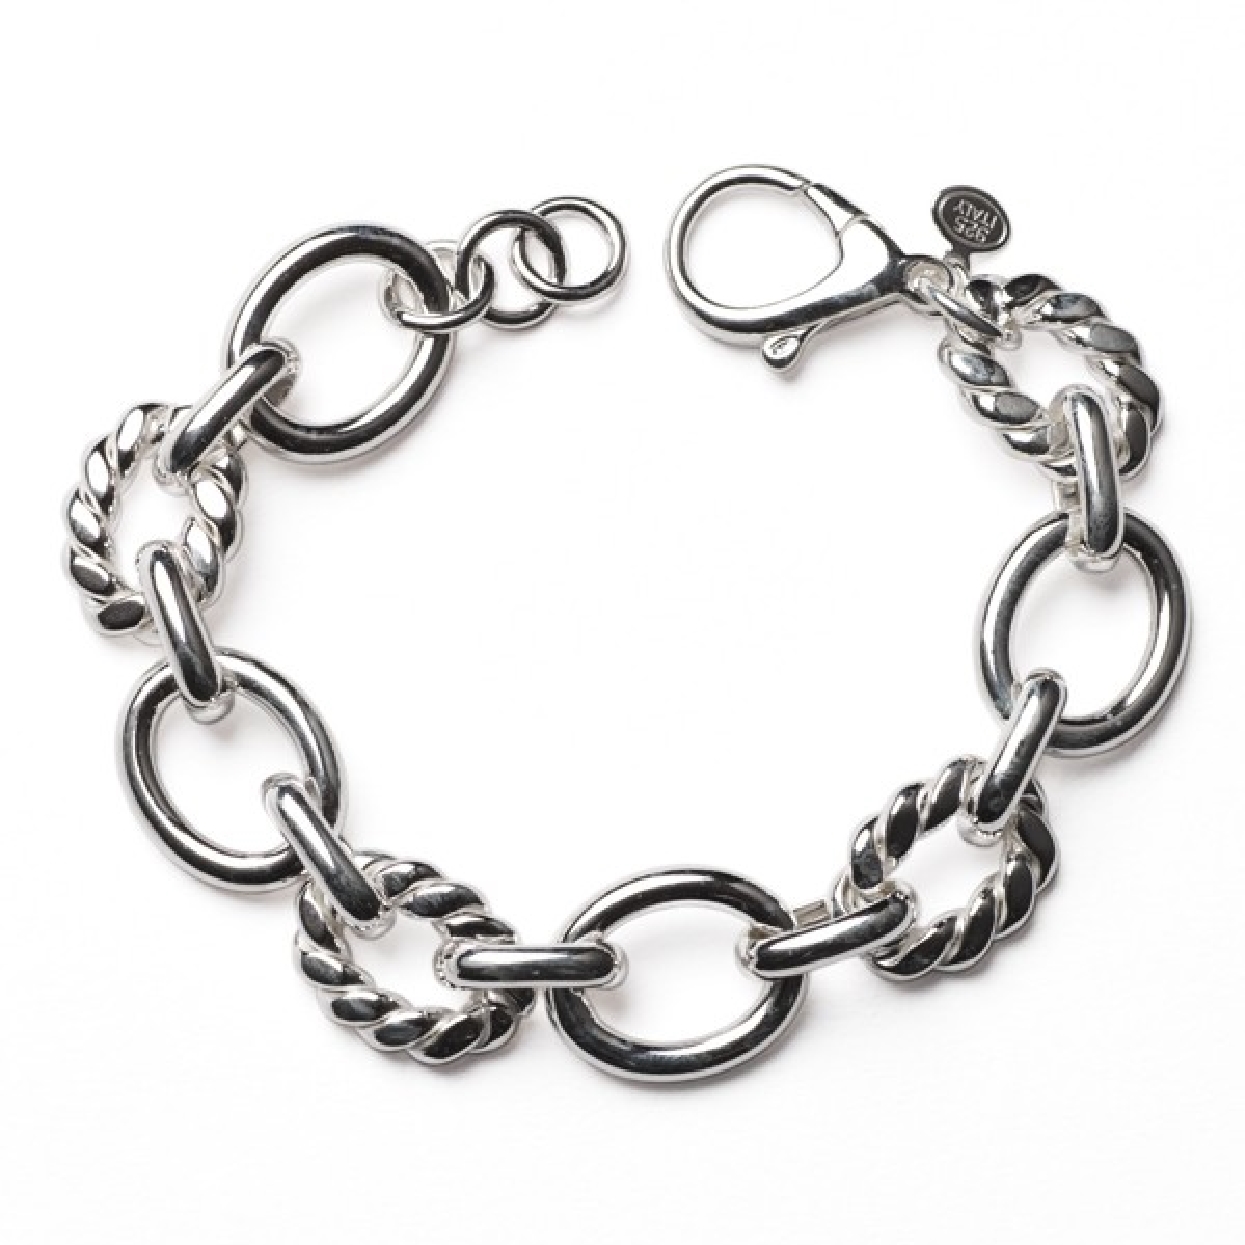 Southern Gates Sterling Silver Contemporary Pippa Plain and Textured Bracelet; 8 inches

KAR552